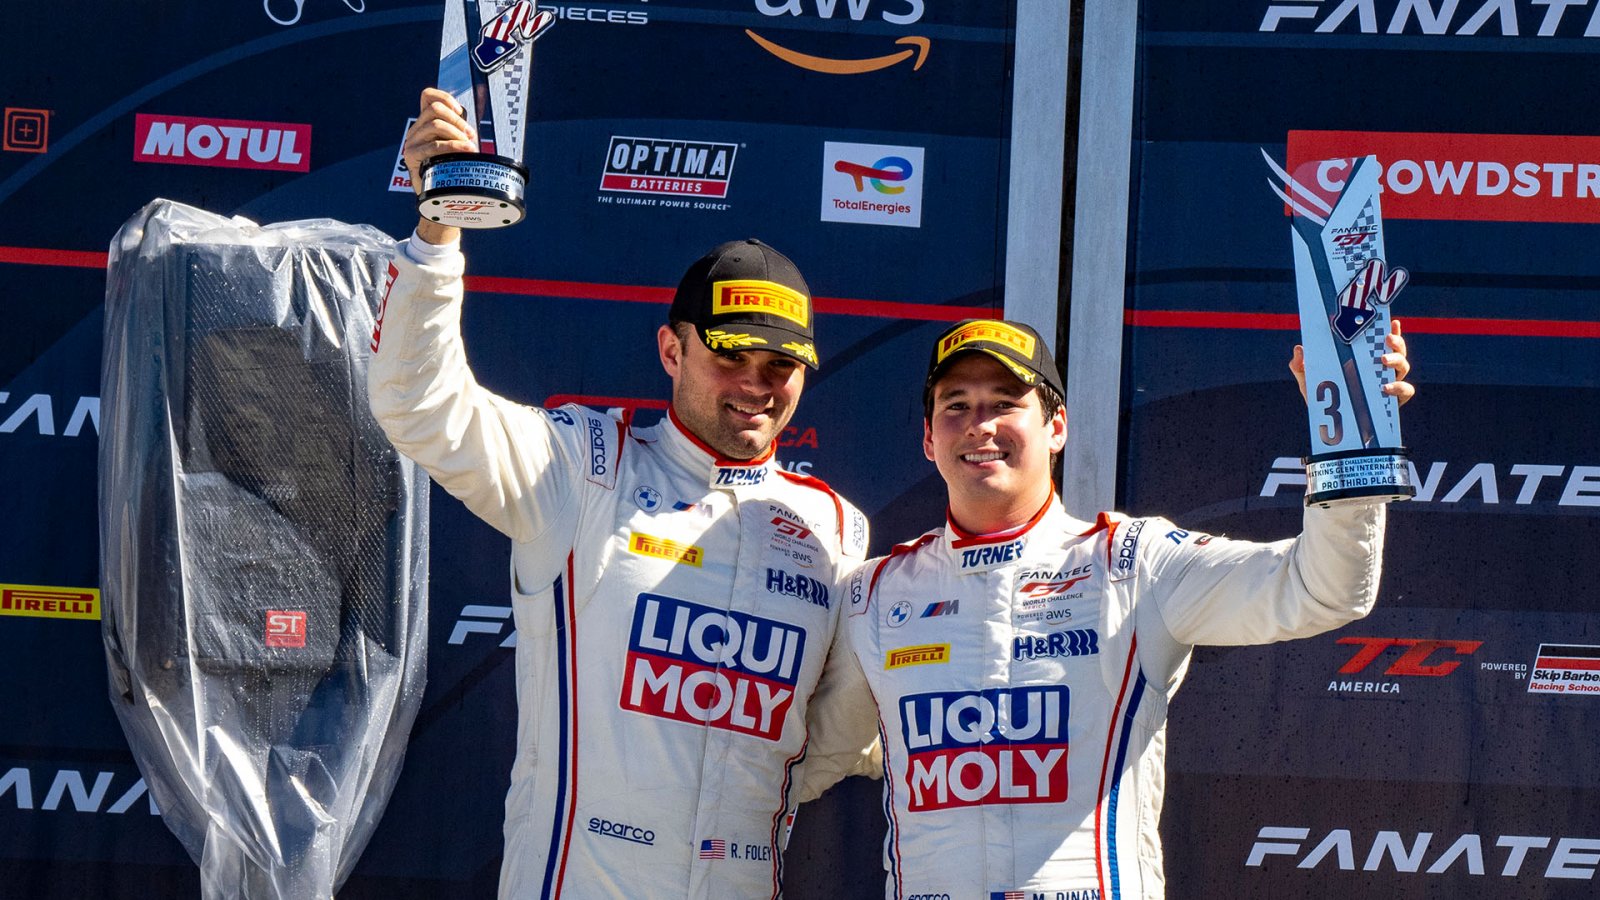 Second and Third Place Finishes for Dinan and Foley at Watkins Glen